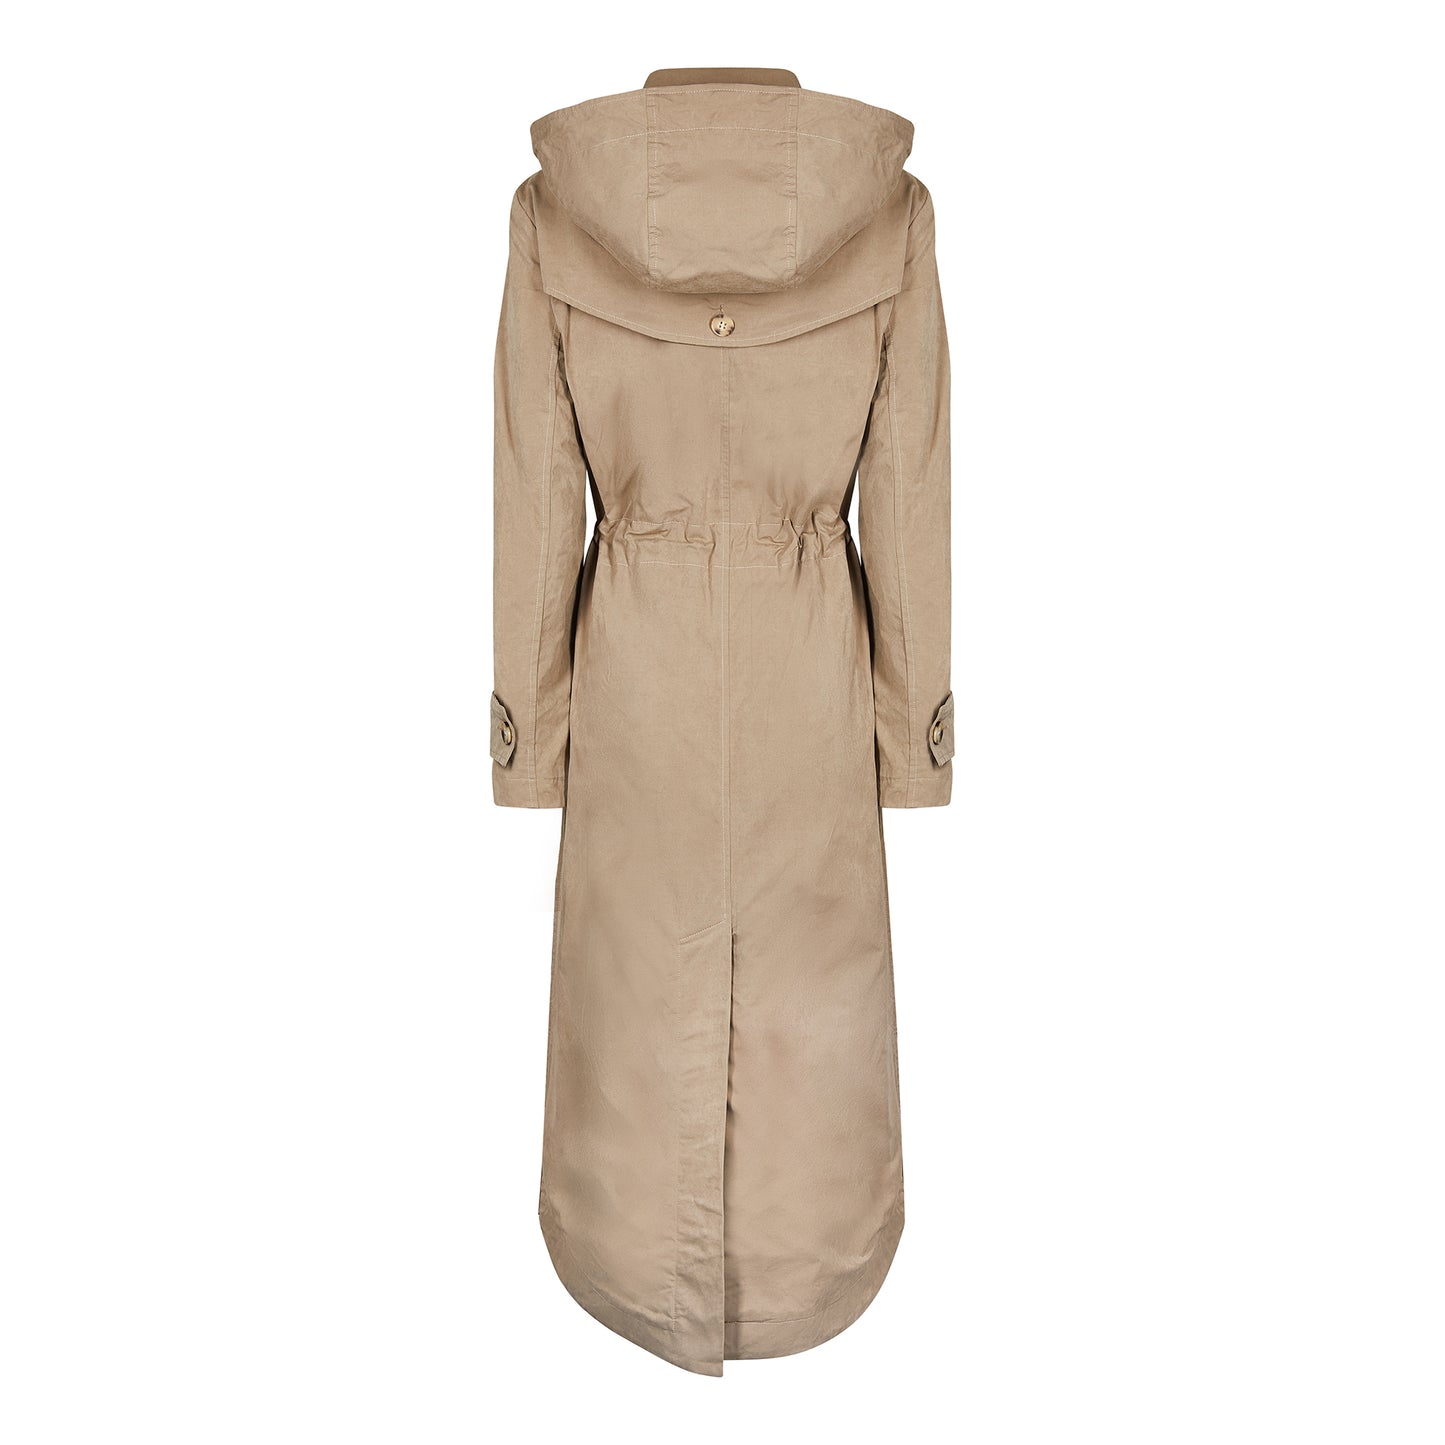 Classic Ladies British Trench Coat in Taupe coloured Cotton with a Contrast Check Lining